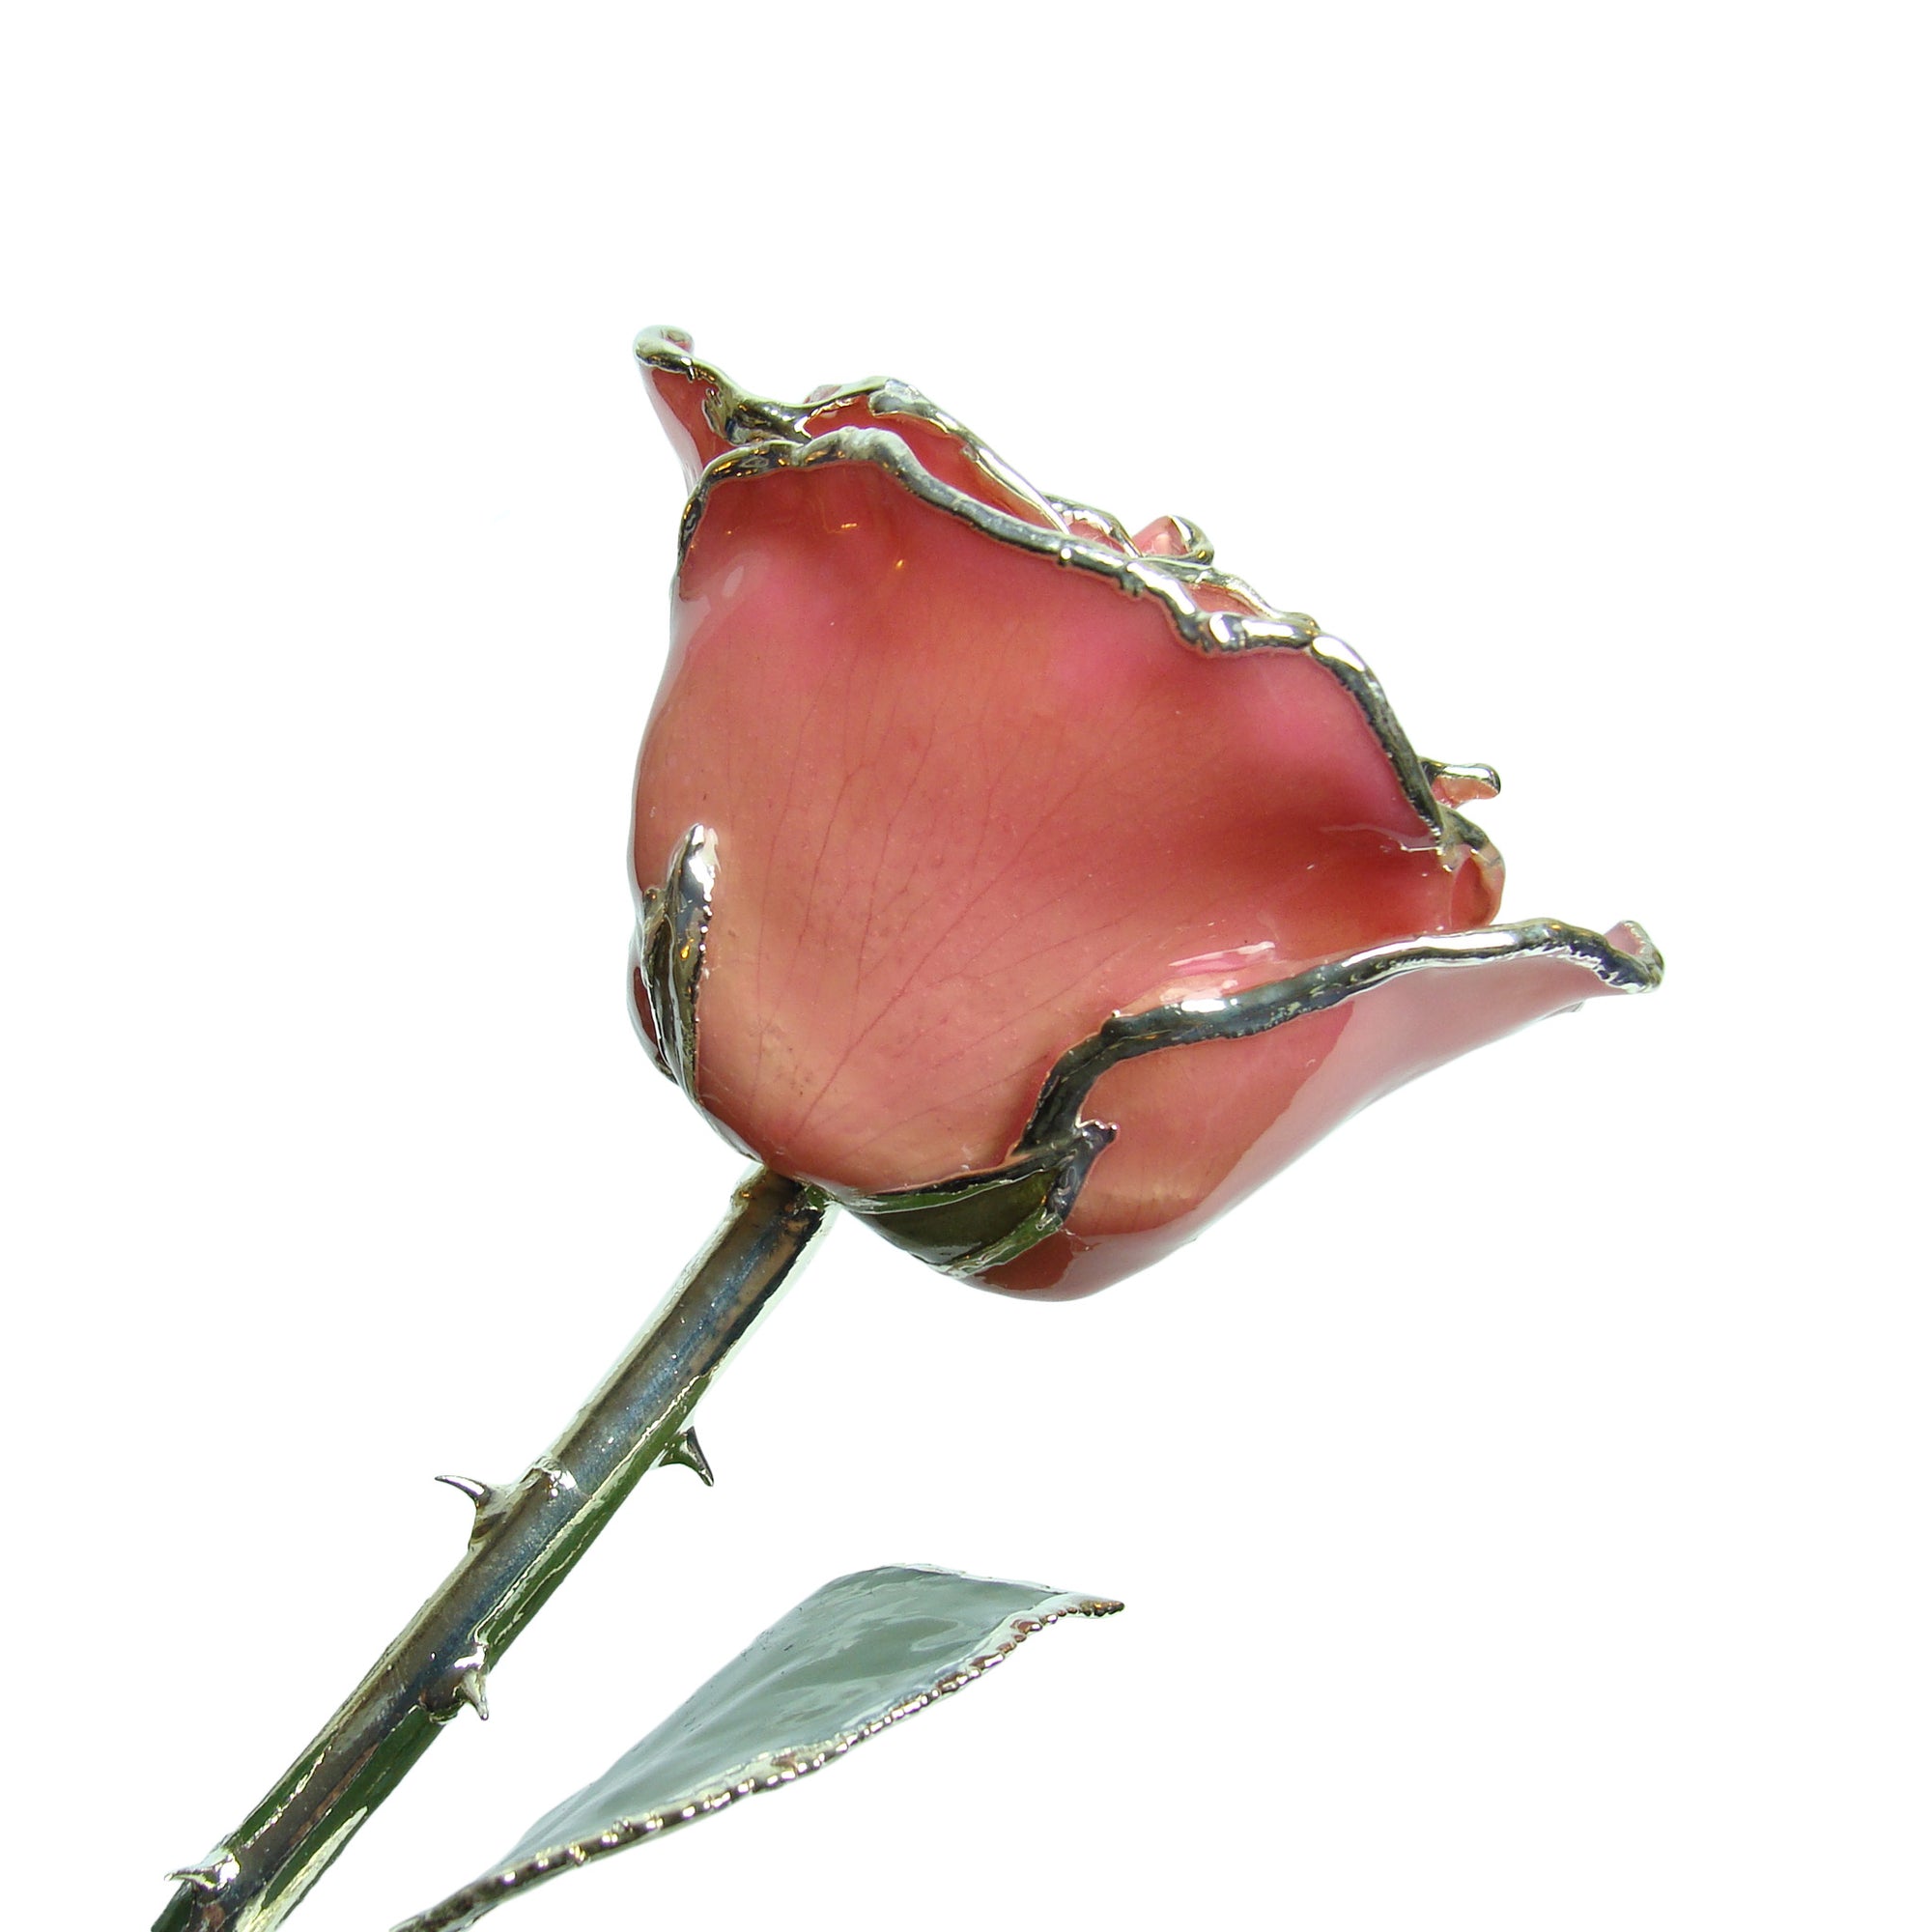 Silver Trimmed Forever Rose with Pink Petals. View of Stem, Leaves, and Rose Petals and Showing Detail of Silver Trim